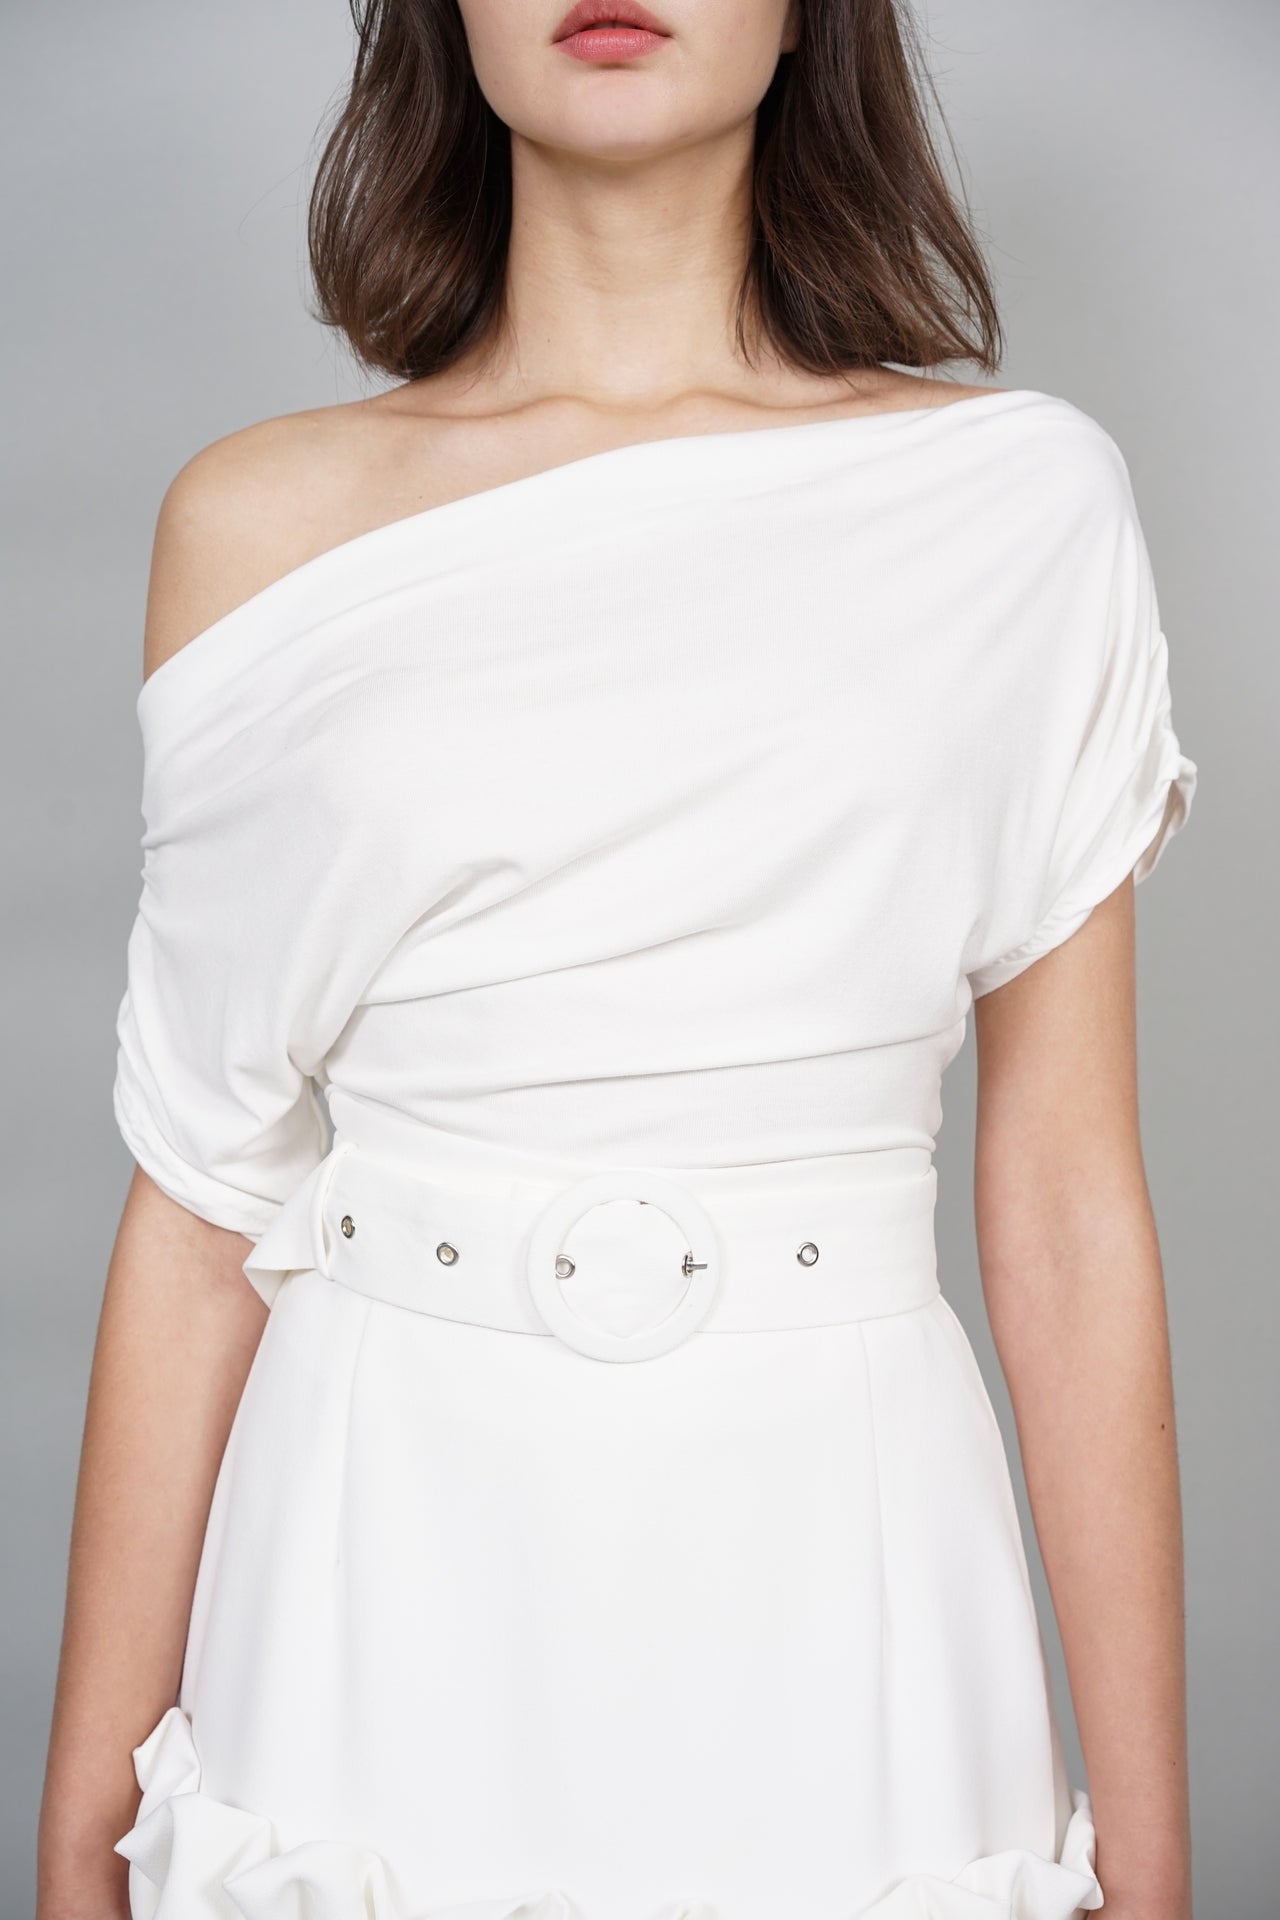 EVERYDAY / Cleo Toga Top in White